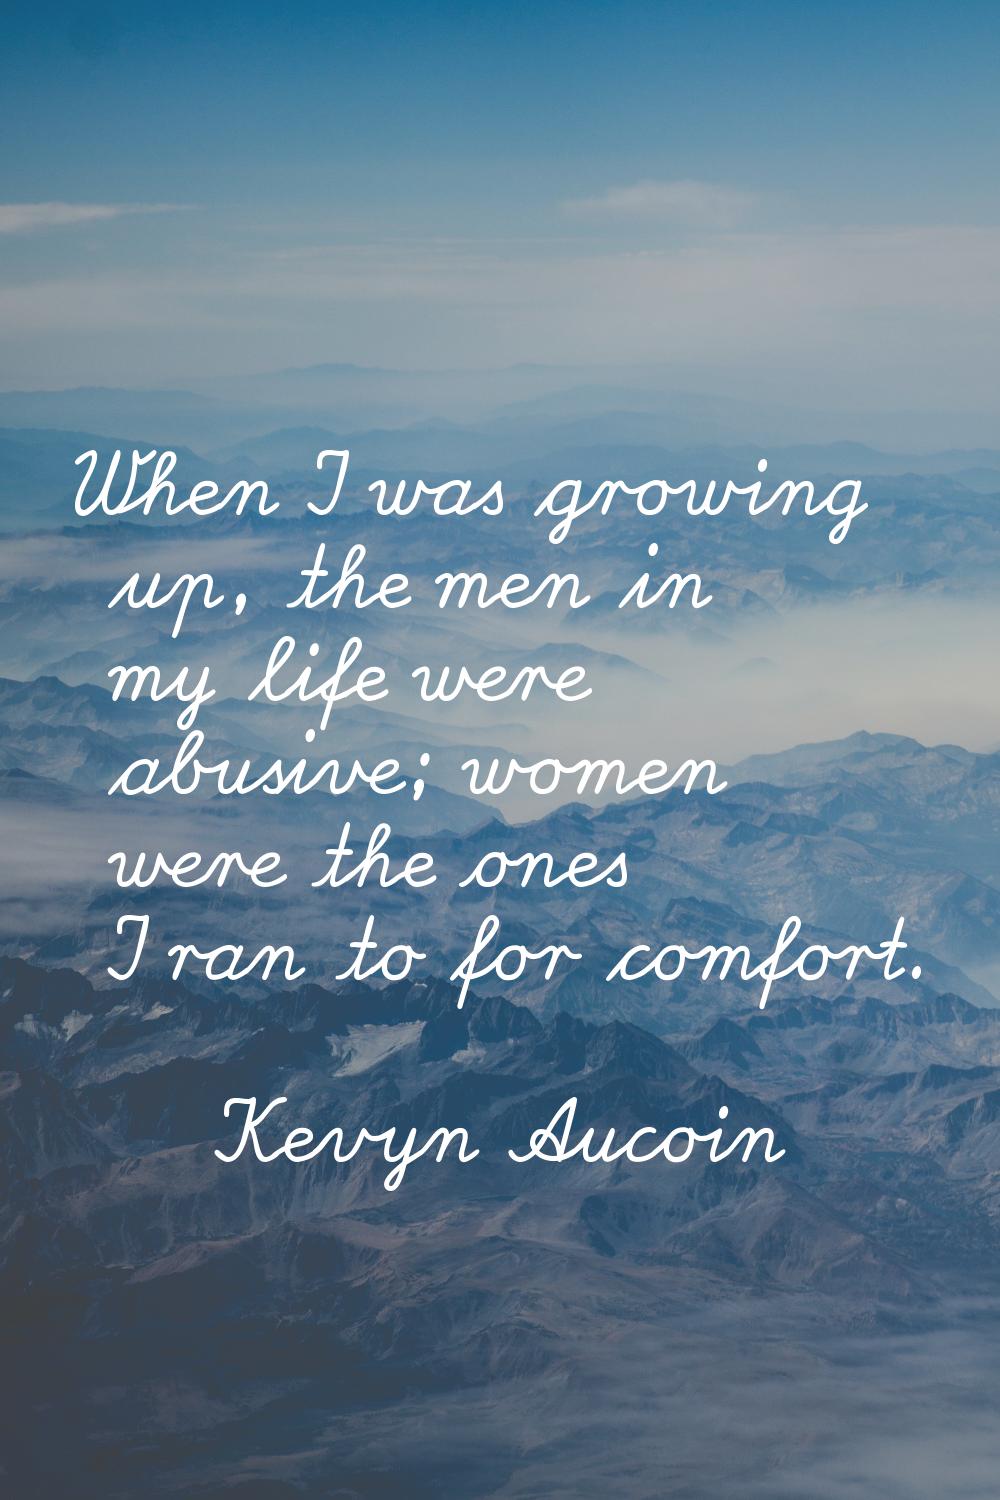 When I was growing up, the men in my life were abusive; women were the ones I ran to for comfort.